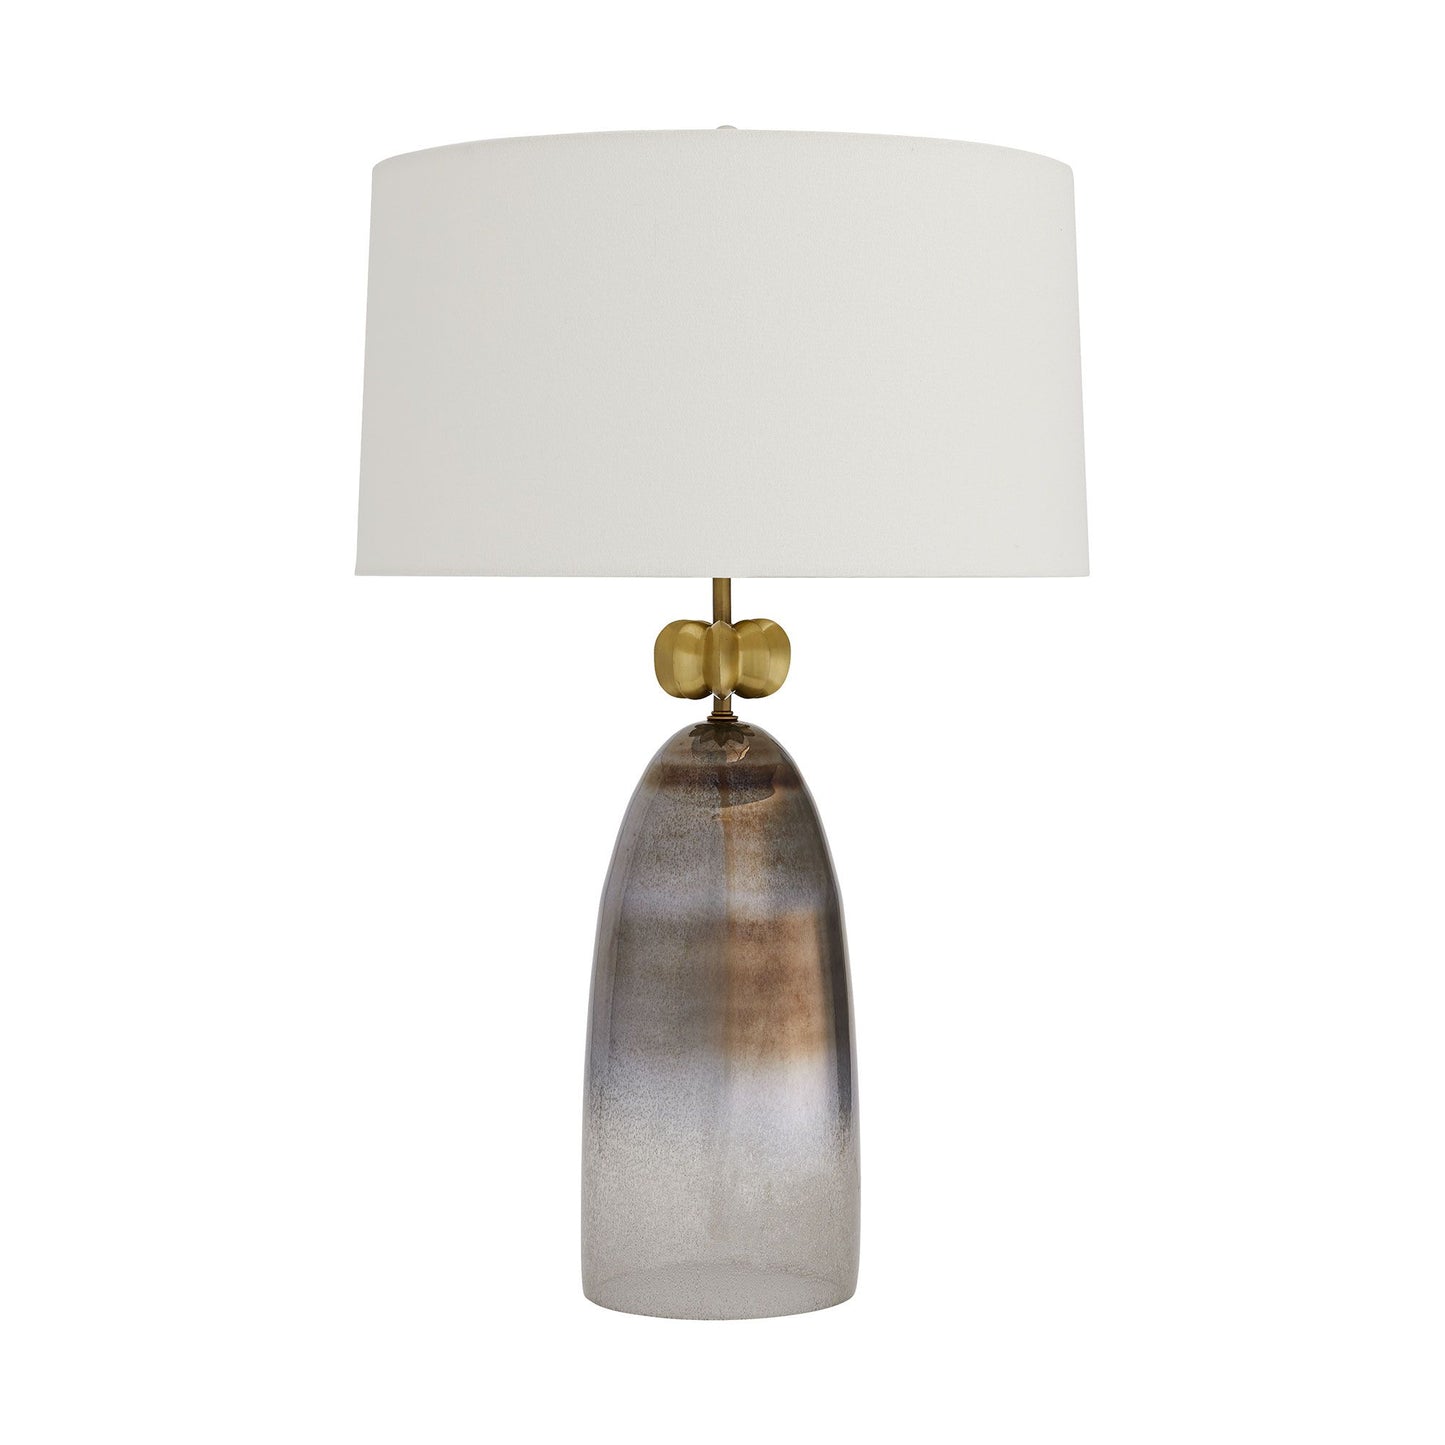 Haley Lamp Ombre Glass and Antique Brass